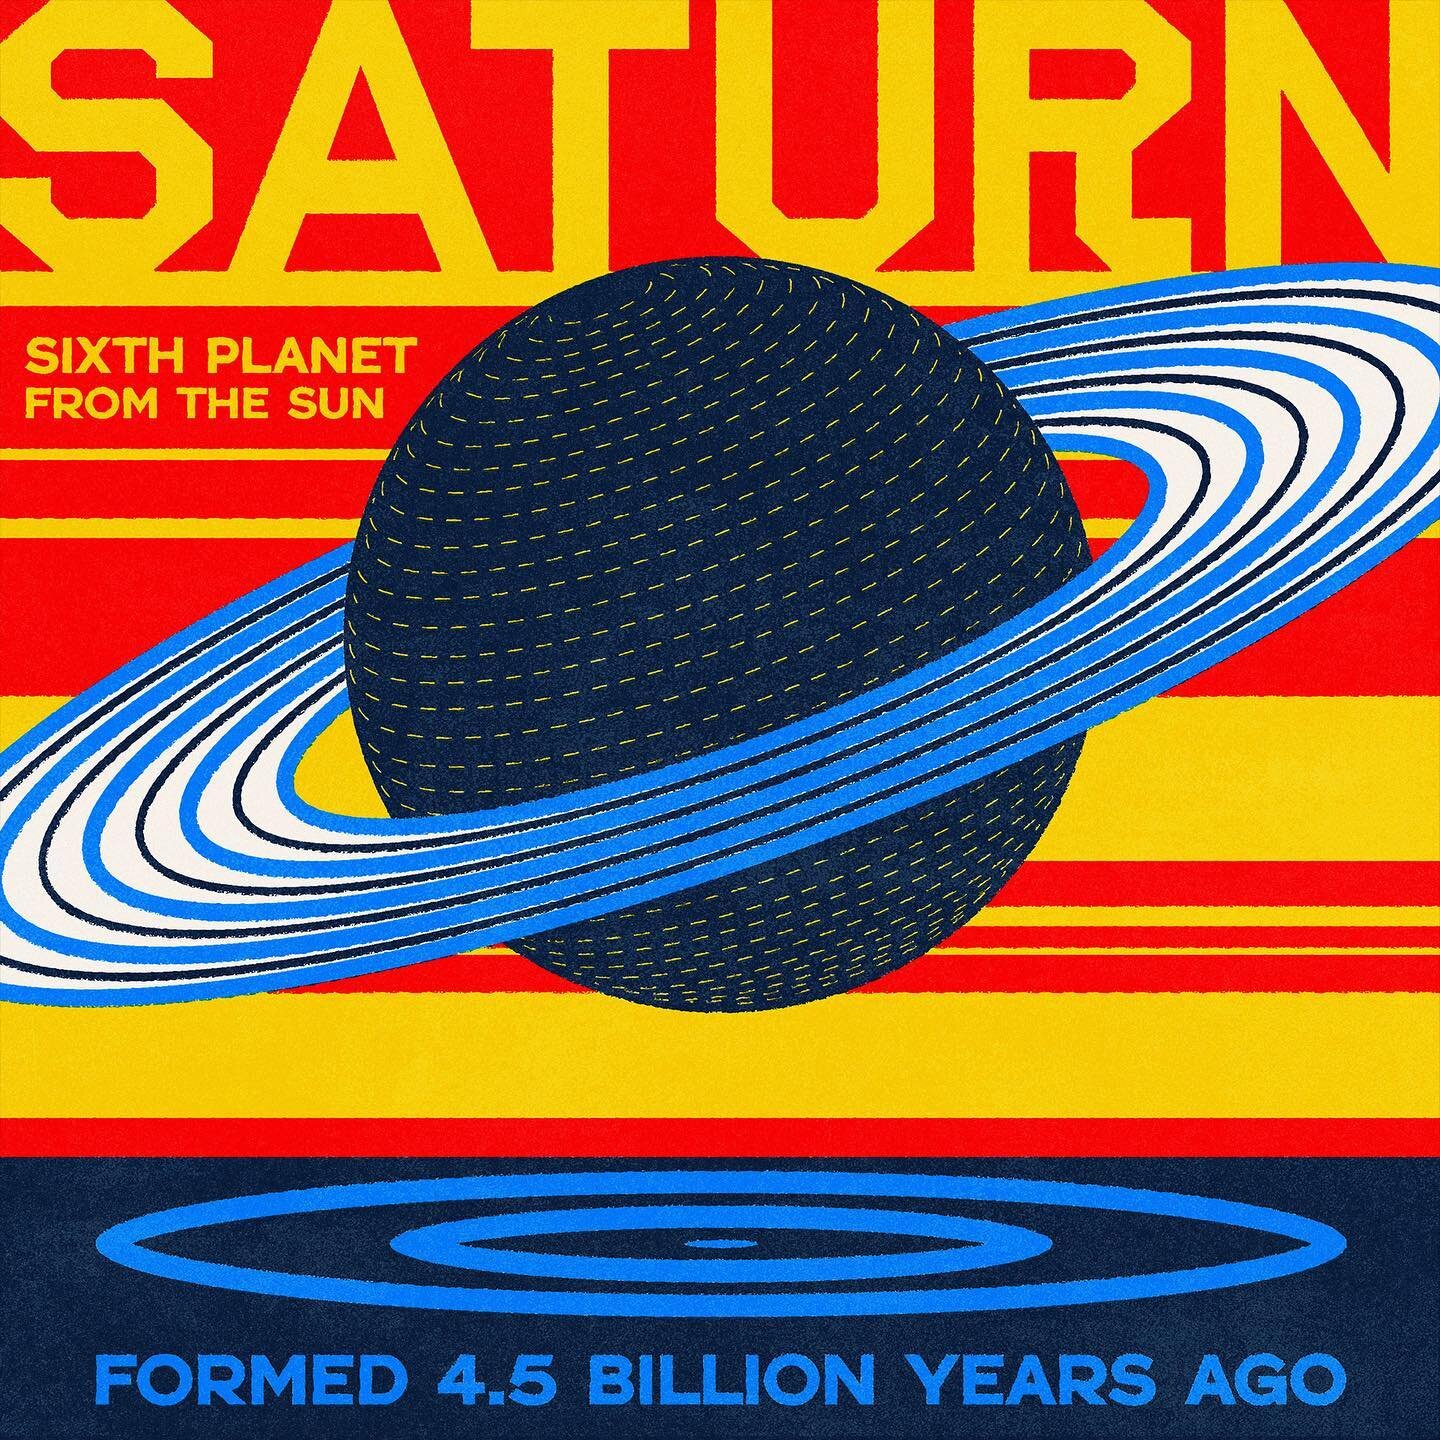 Day two of @boringfriends #shittyartfriends challenge with the prompt &ldquo;throwback&rdquo; (plus &quot;nostalgia, colourful, fun&quot;) from @retrosupply. Does it get any more throwback than the universe? 

#saturn #illustration #universe #solarsy